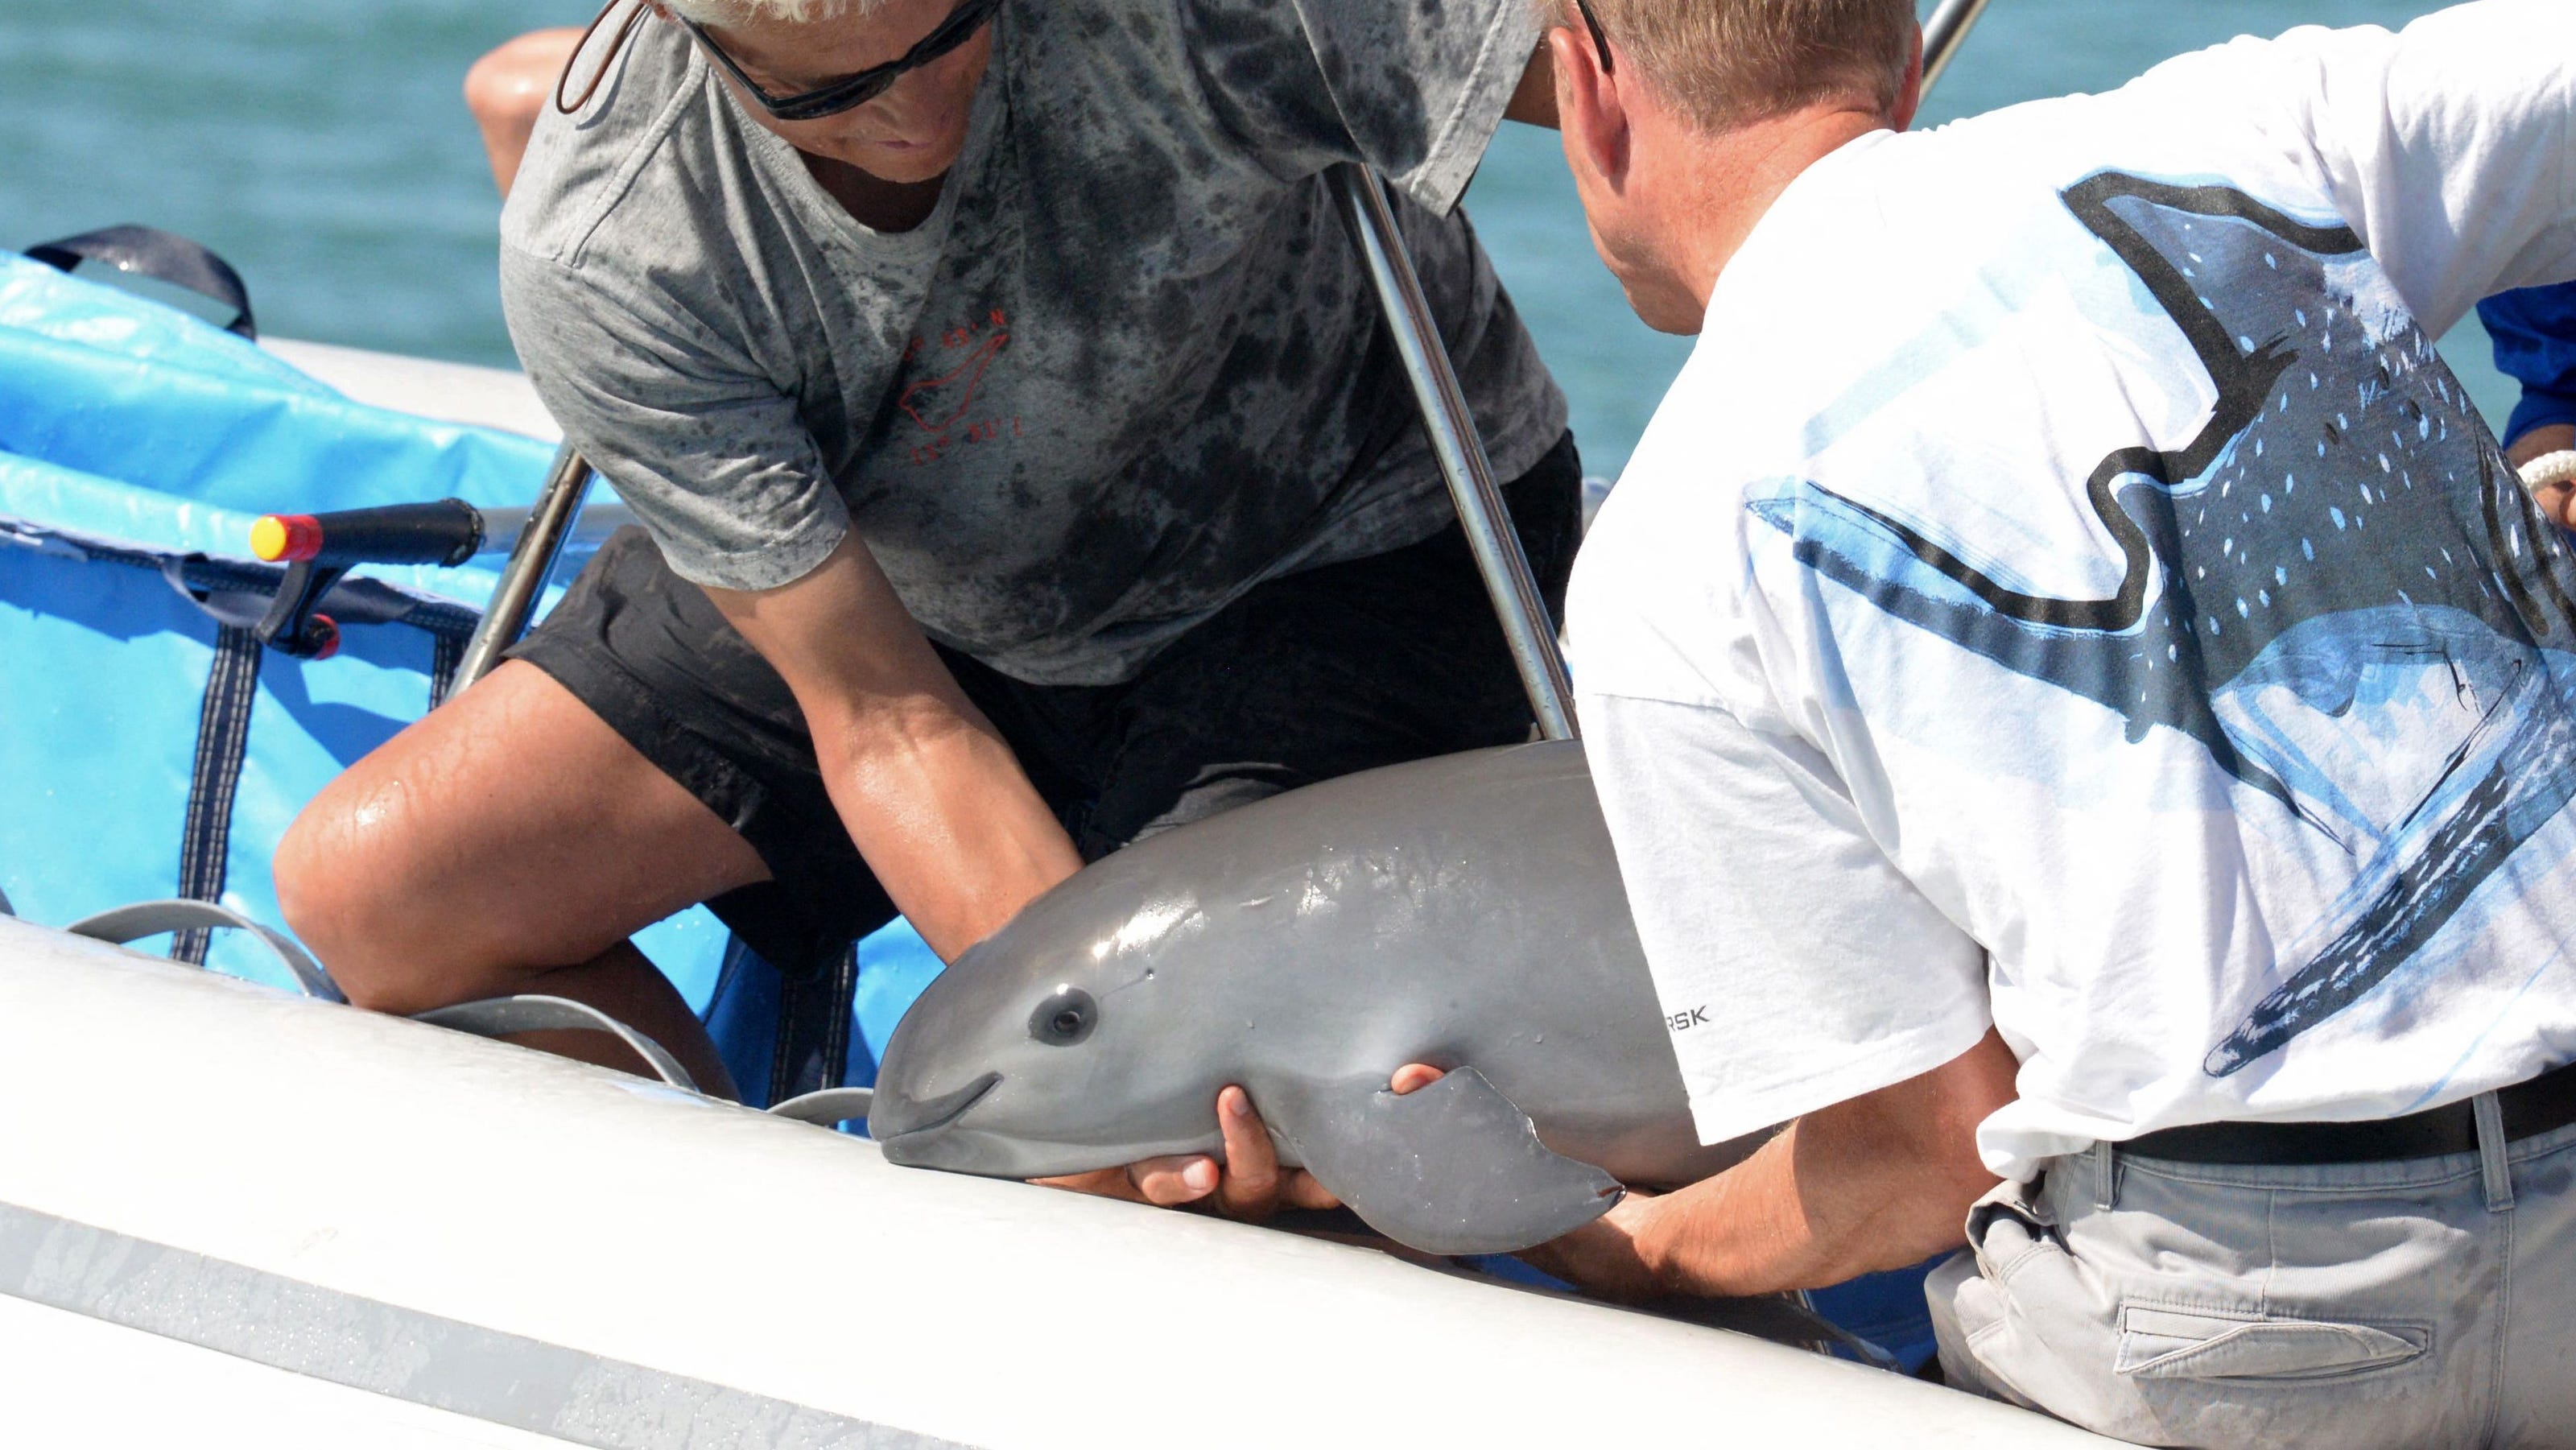 Vaquita porpoise population drops to a population of 10